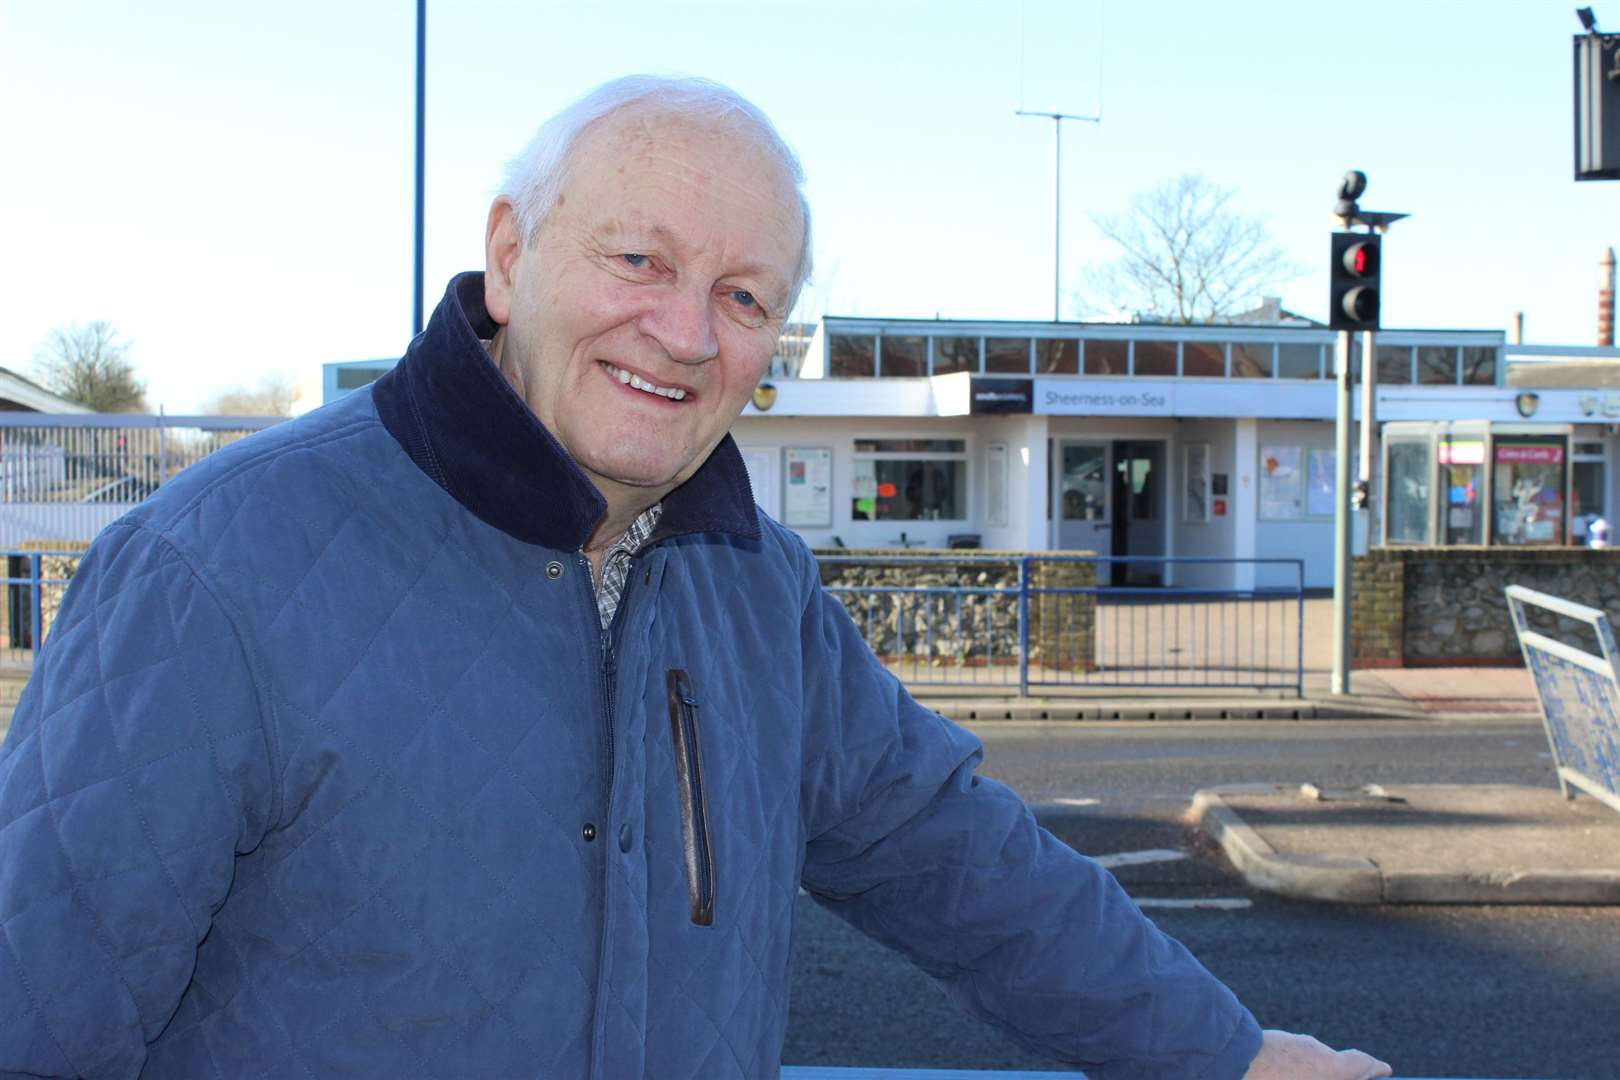 Taxi driver Terry Baker, pictured outside Sheerness railway station, was trapped in his cab when a train crashed through the station wall in February 1971